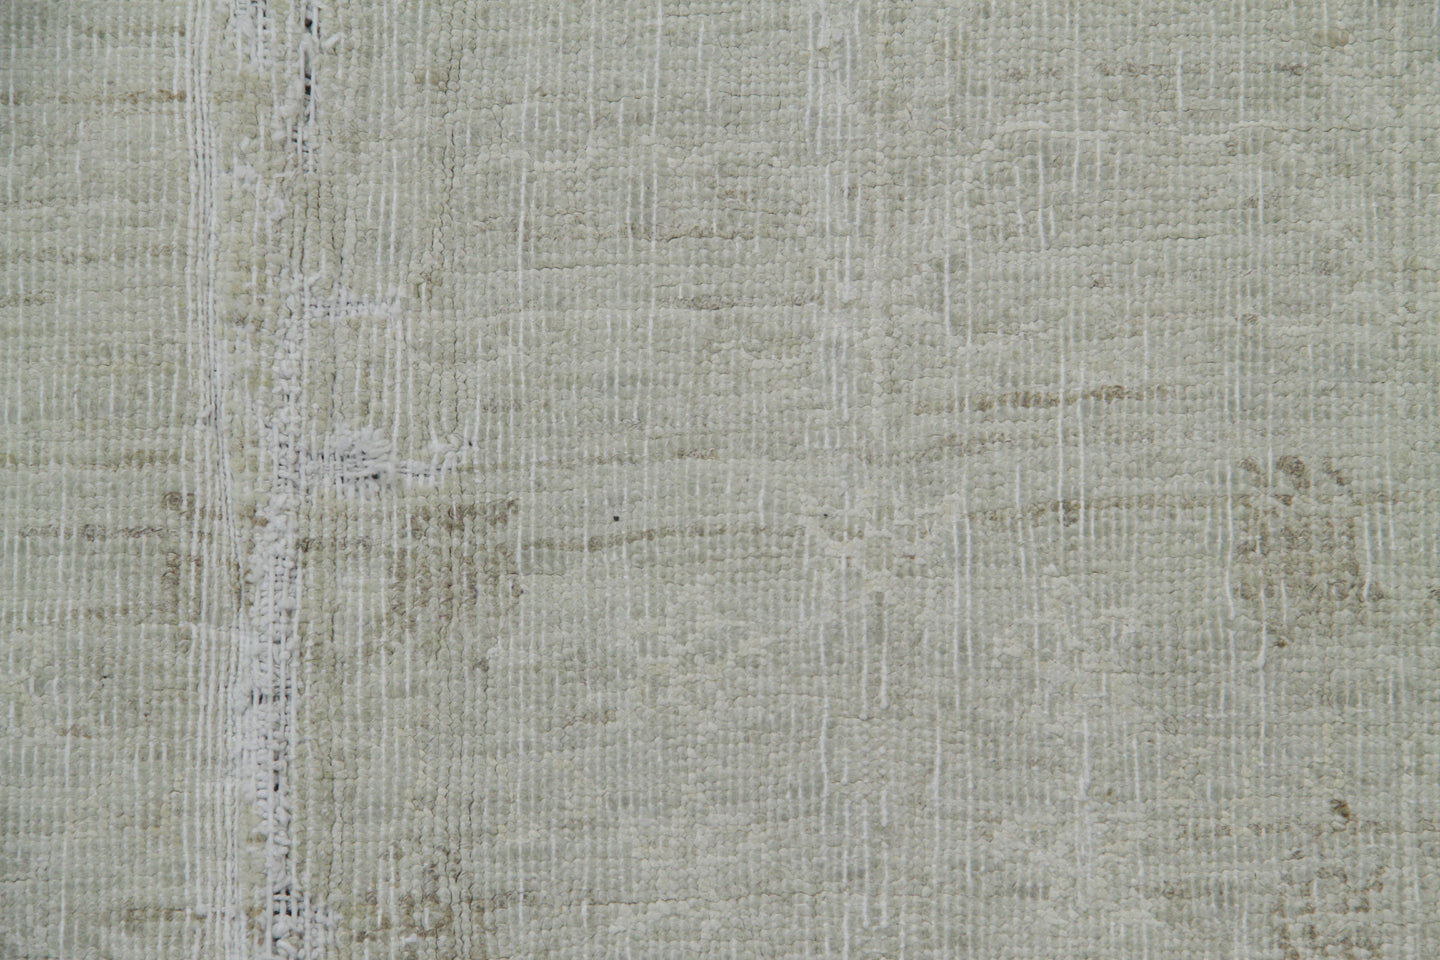 10x12 Pale Washed-out Silk And wool Agra Design Contemporary Ariana Vintage Collection Fine Rug